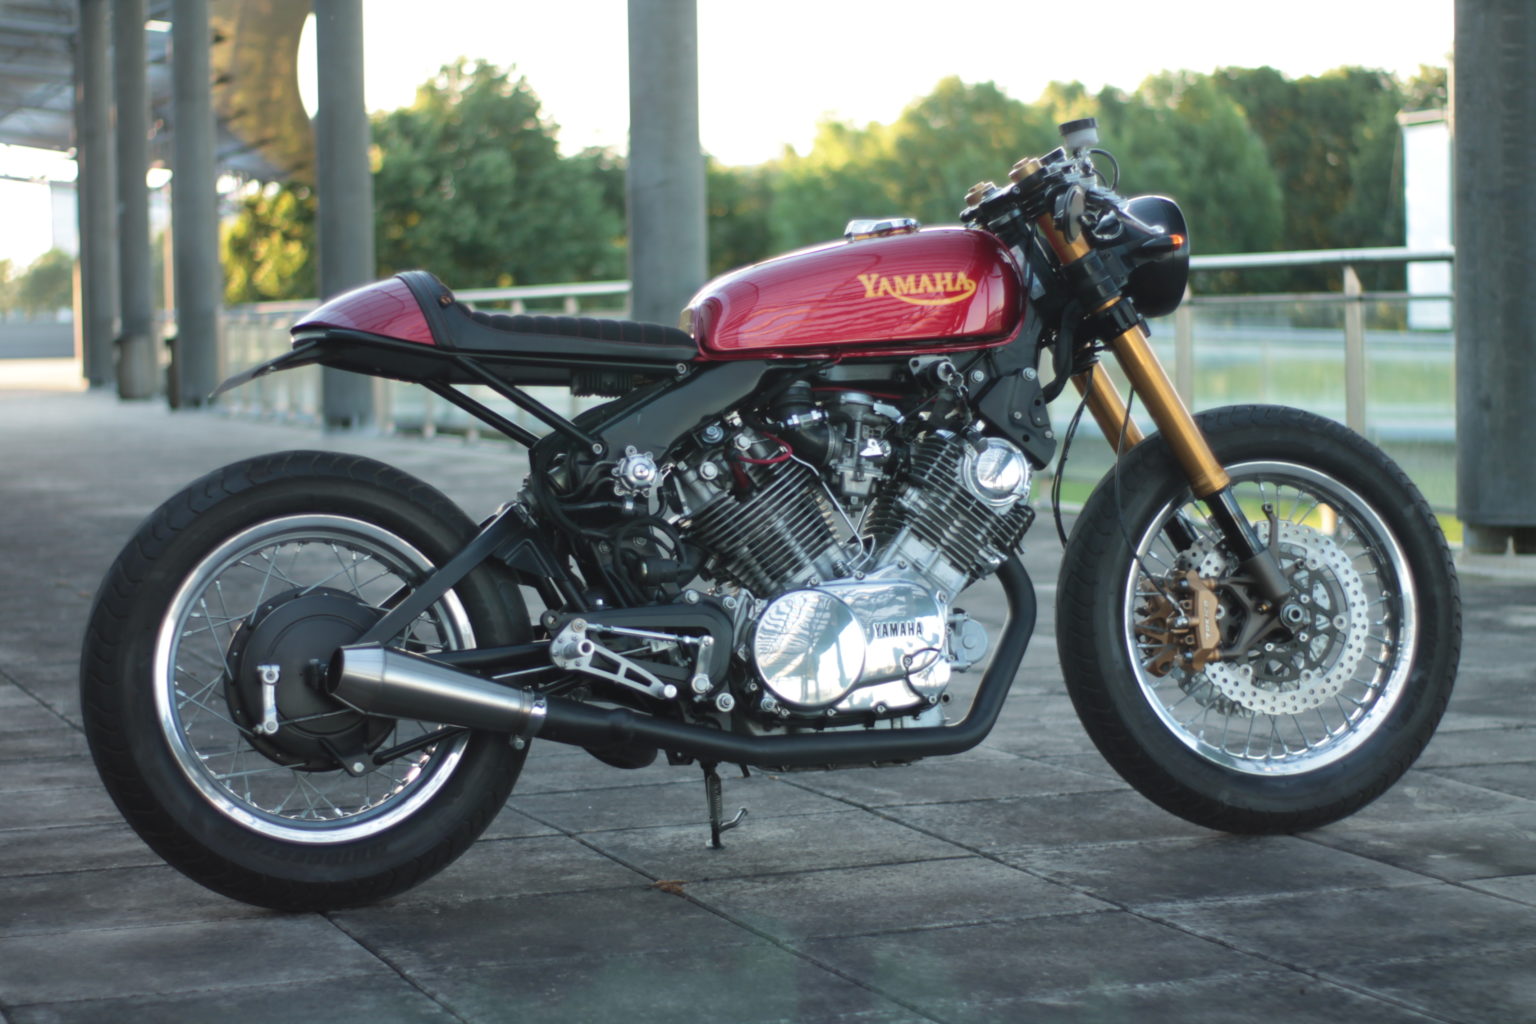 Yamaha Virago 750 by Jean-Pierre from Poitiers